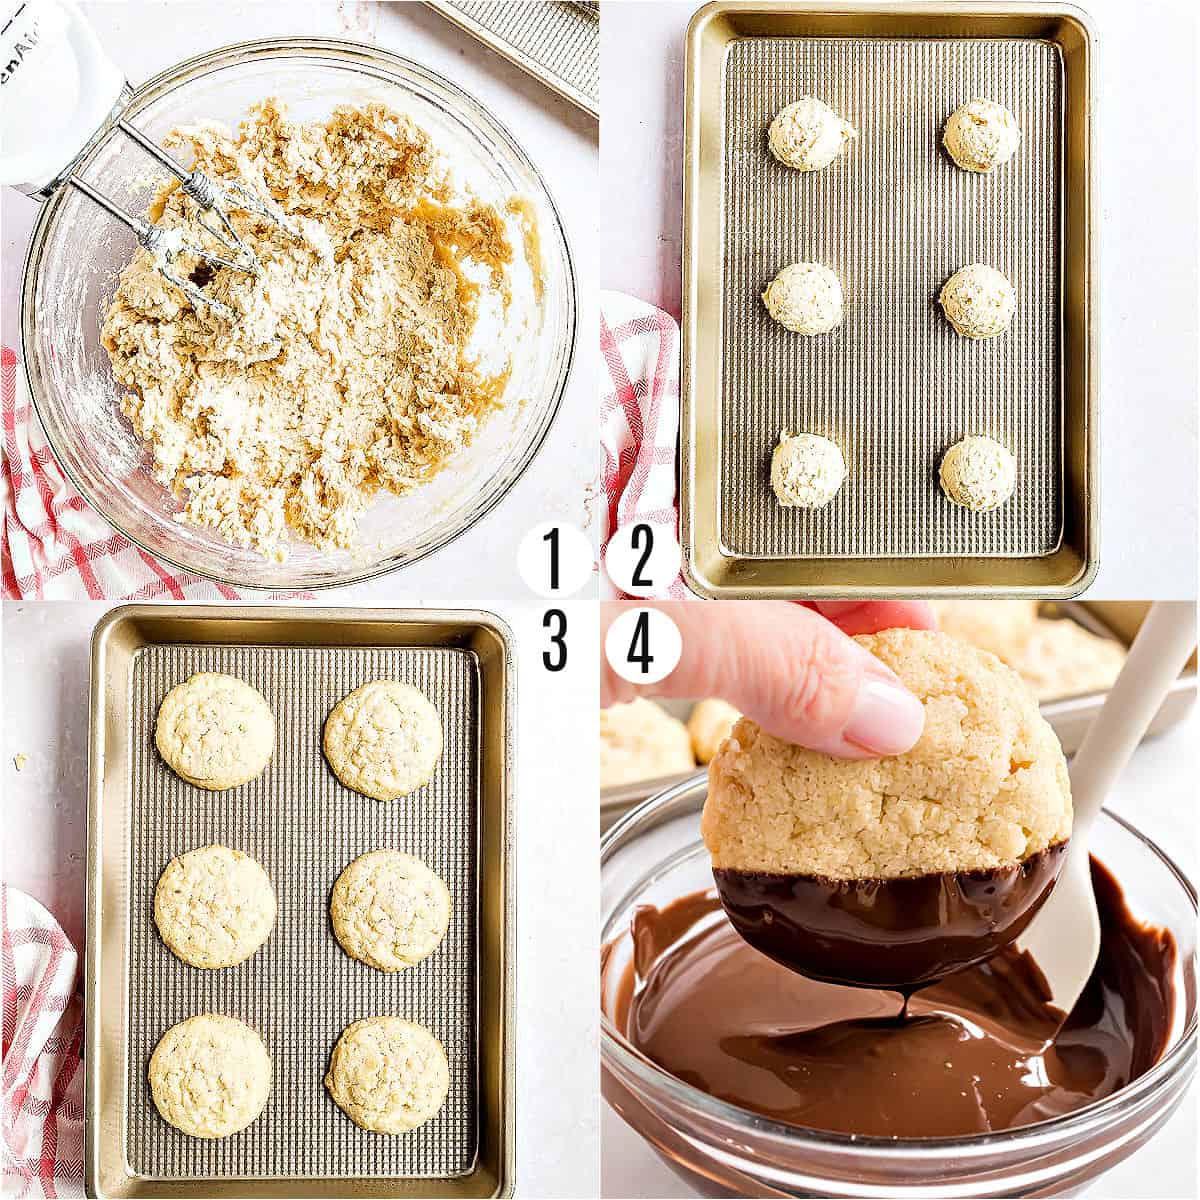 Step by step photos showing how to make potato chip cookies dipped in chocolate.